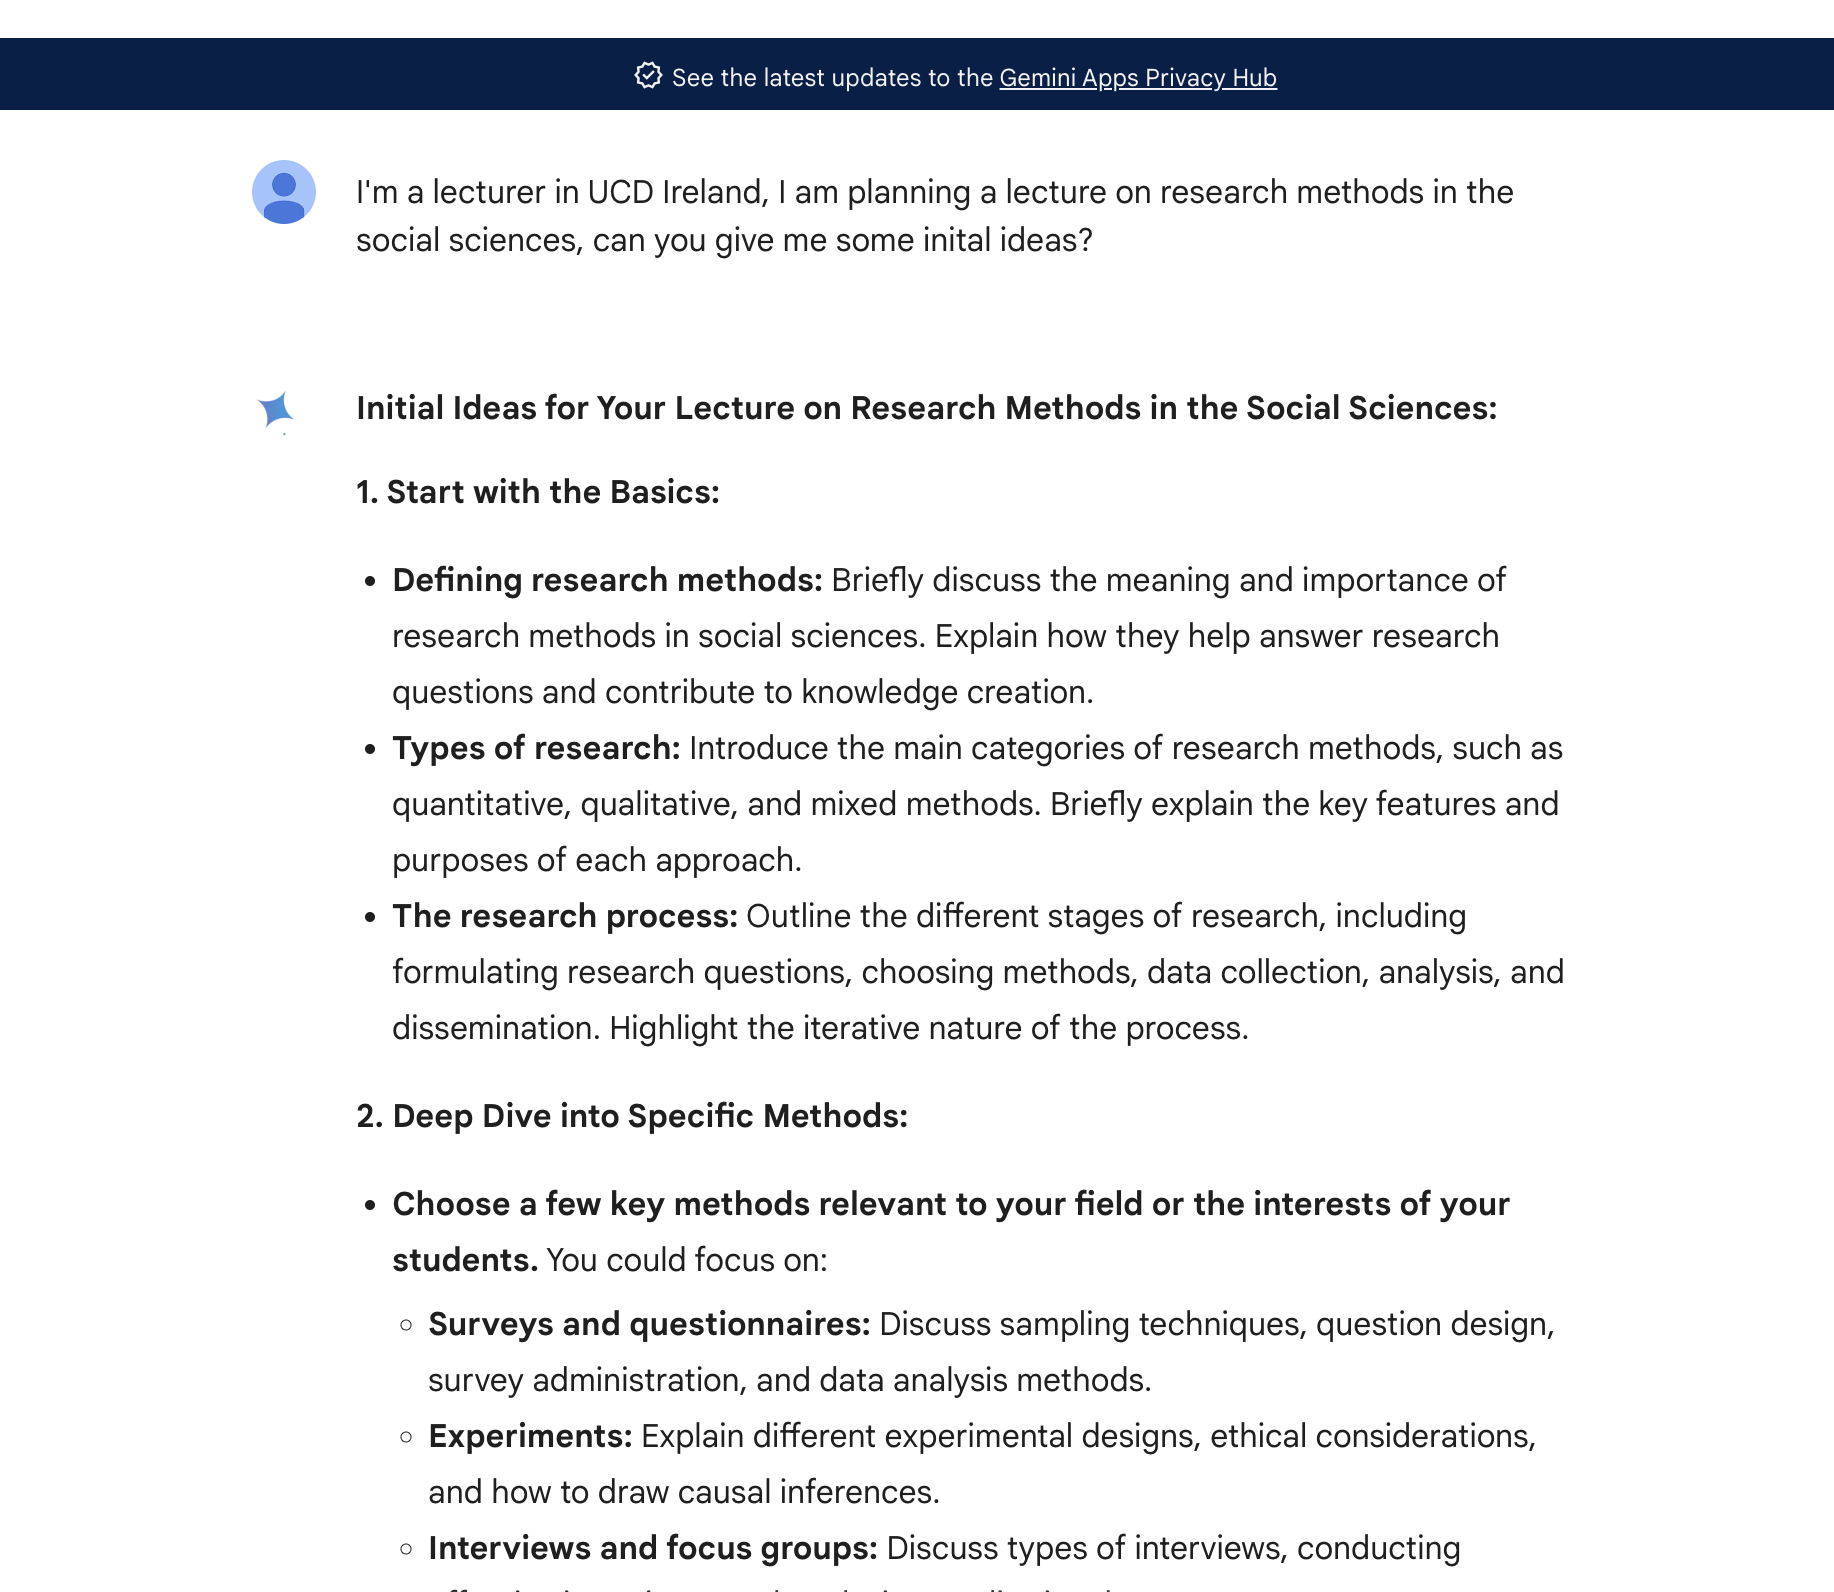 This image provides an example of an input and output from Google Gemini. The input asks for ideas planning a lecture on research methods in the social sciences.